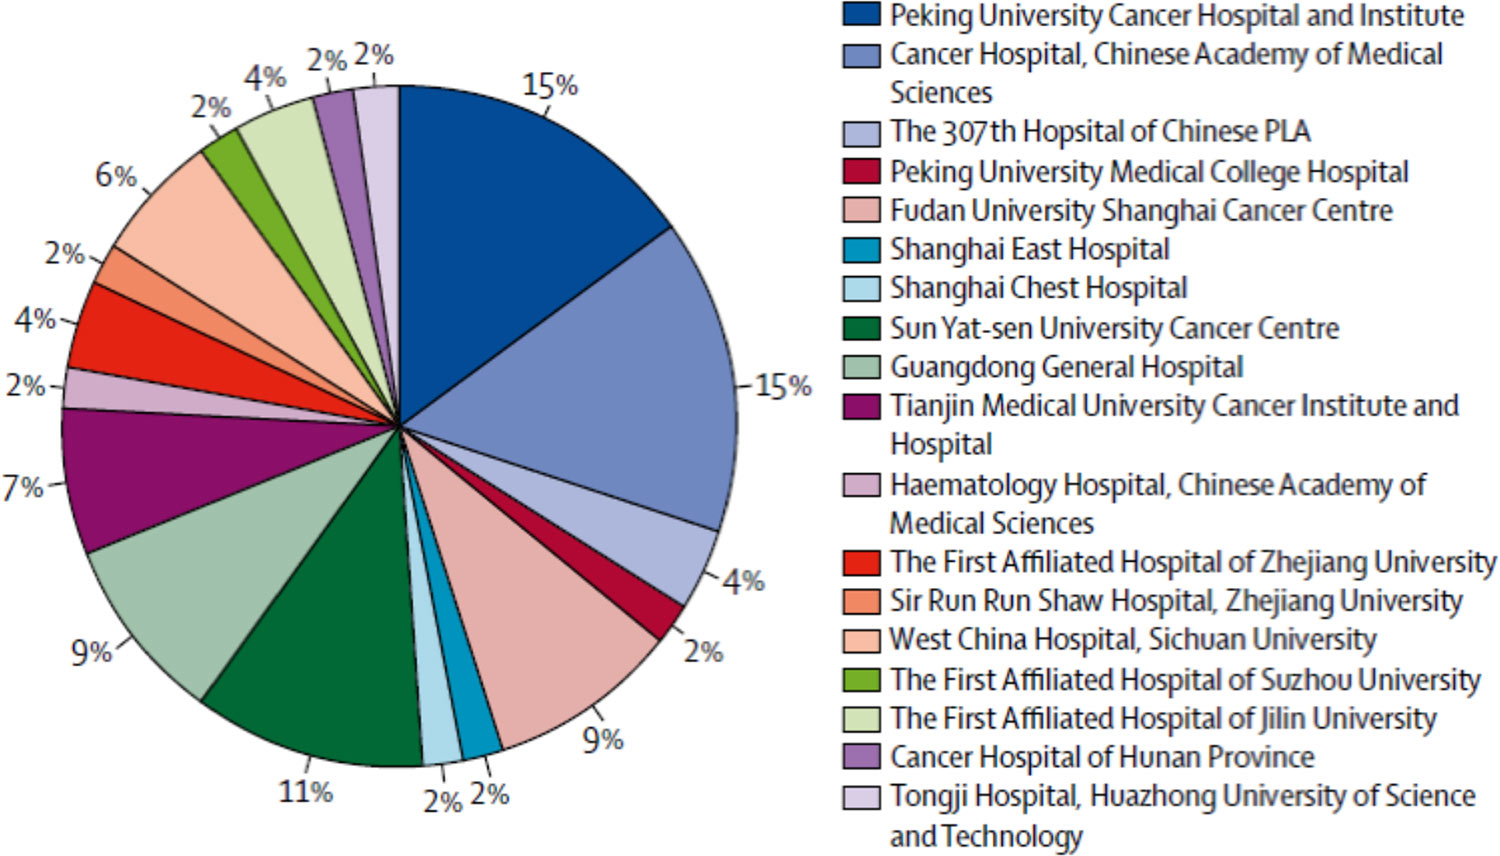 Site distribution of 180 oncology studies conducted in China.